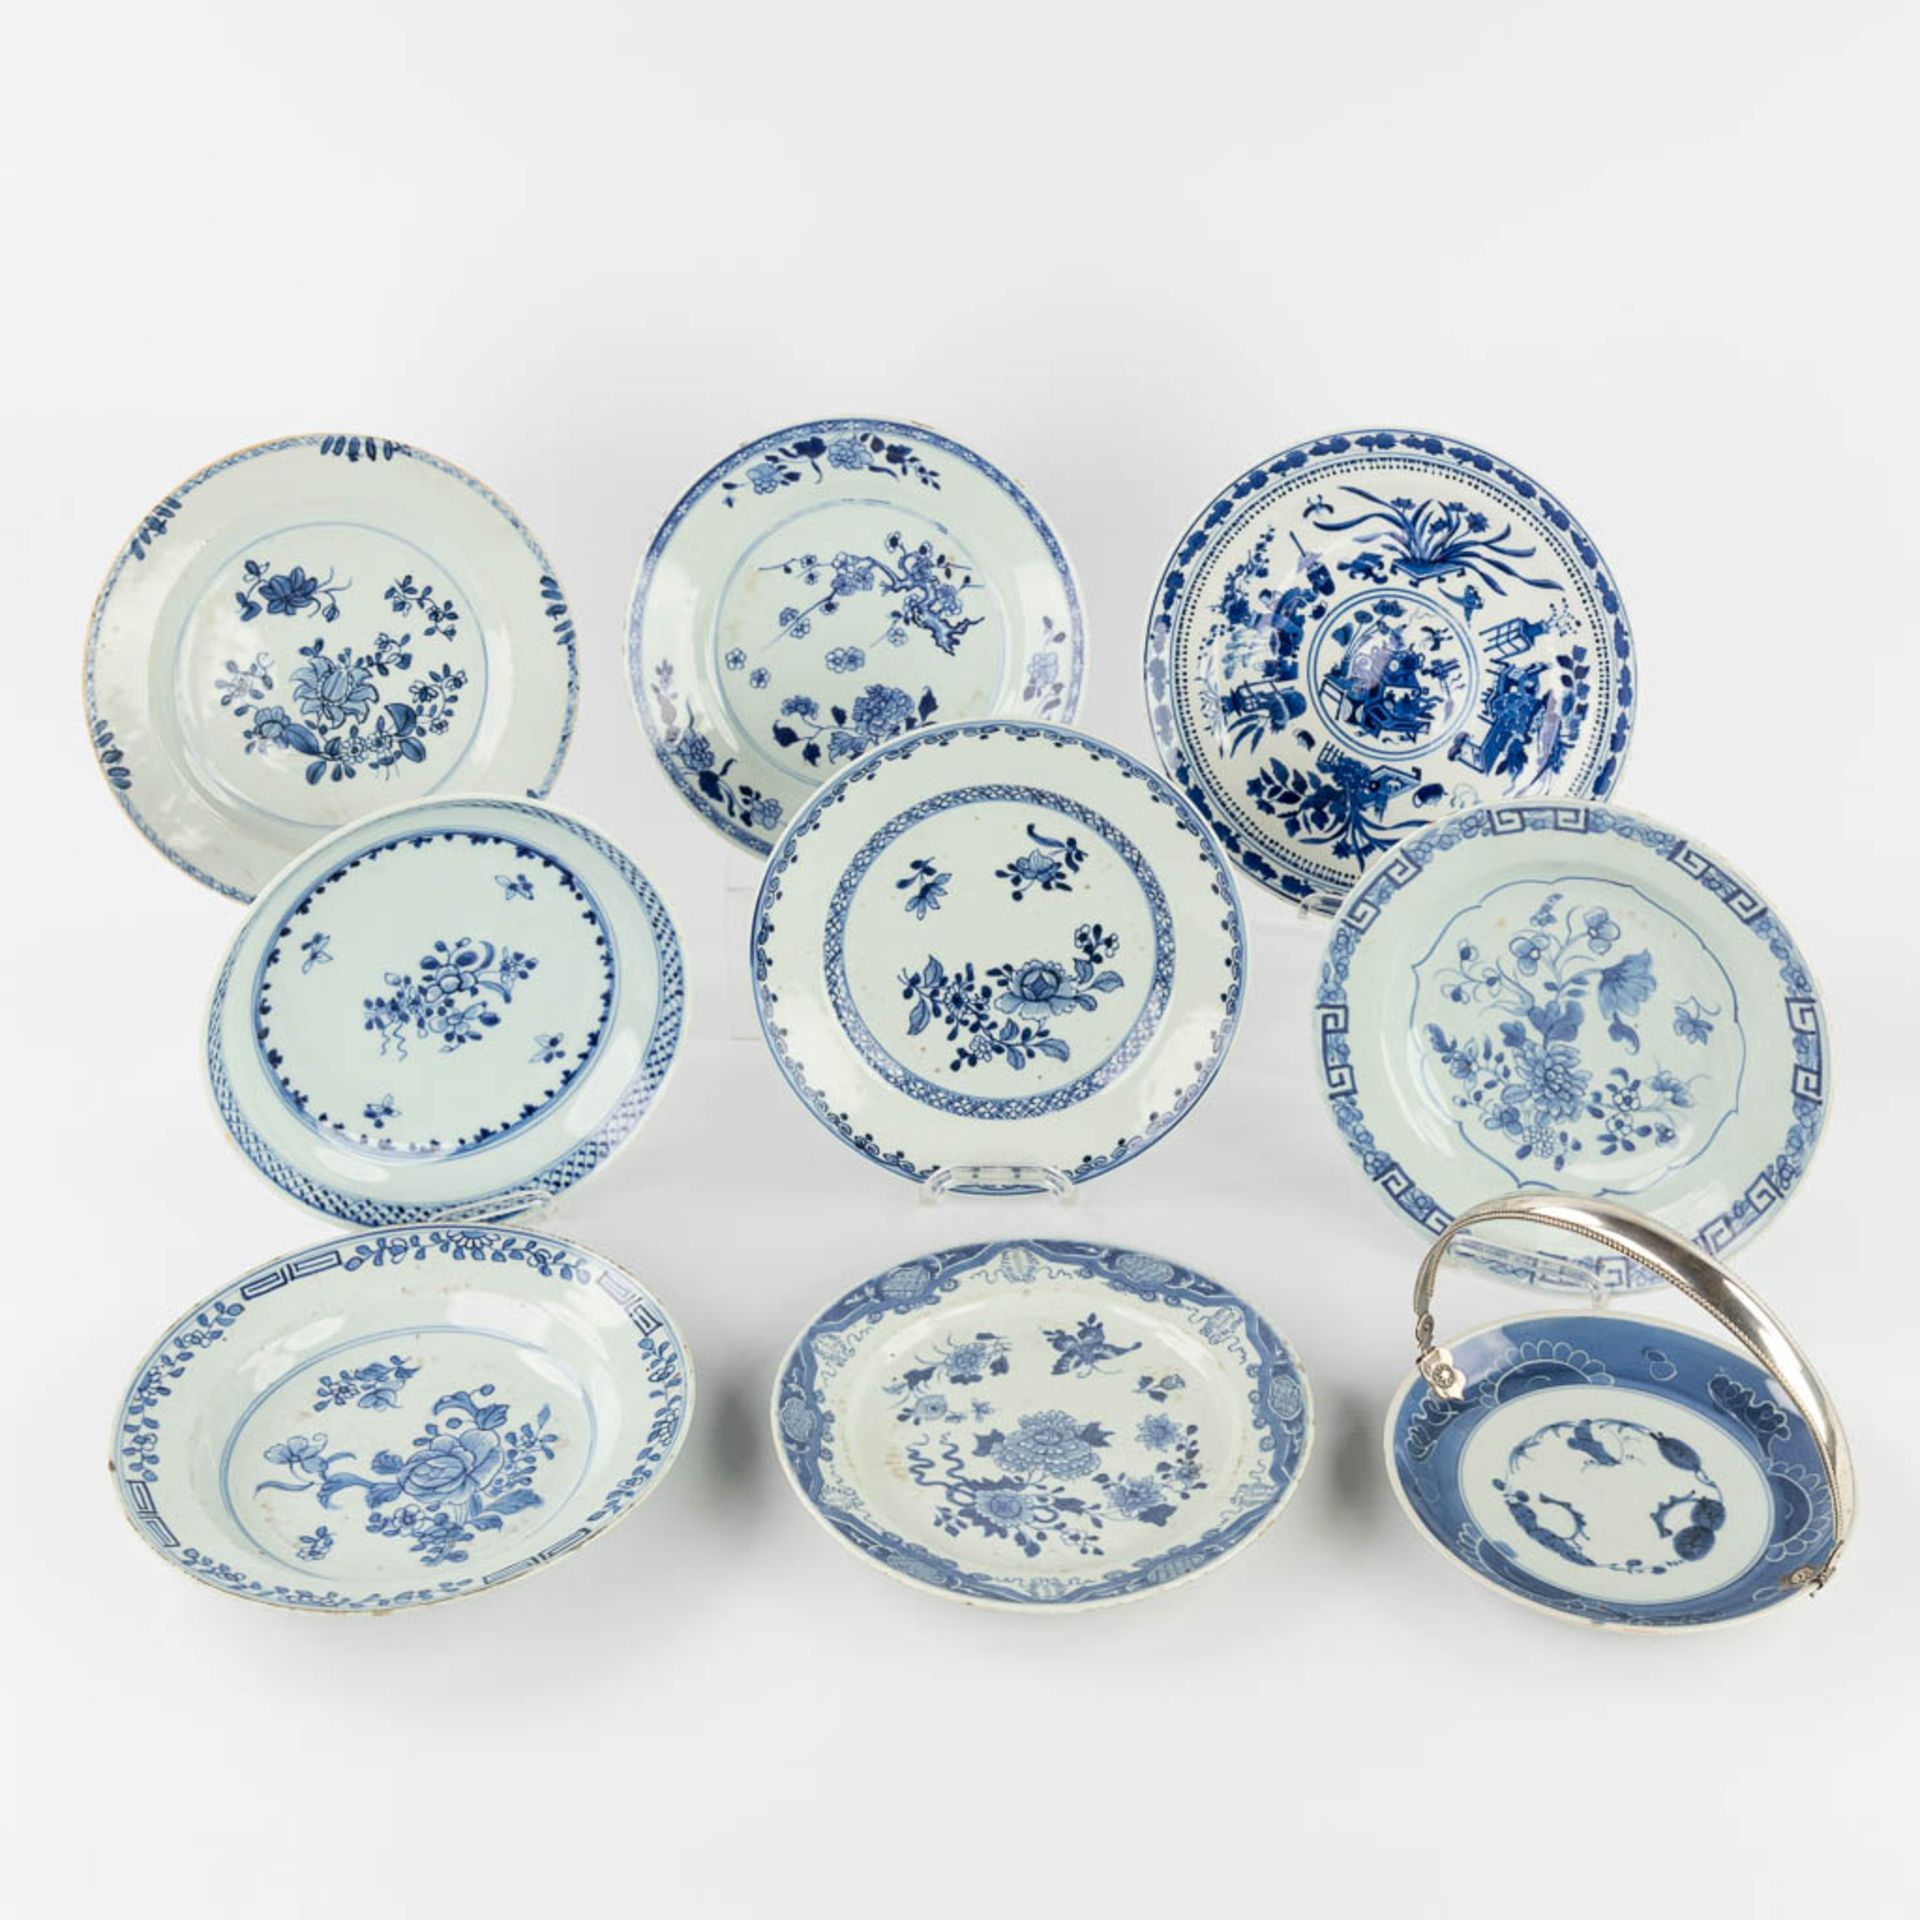 Nine Chinese blue-white decor, of which one has a silver holder. 19th/20th C. (D:23,5 cm)